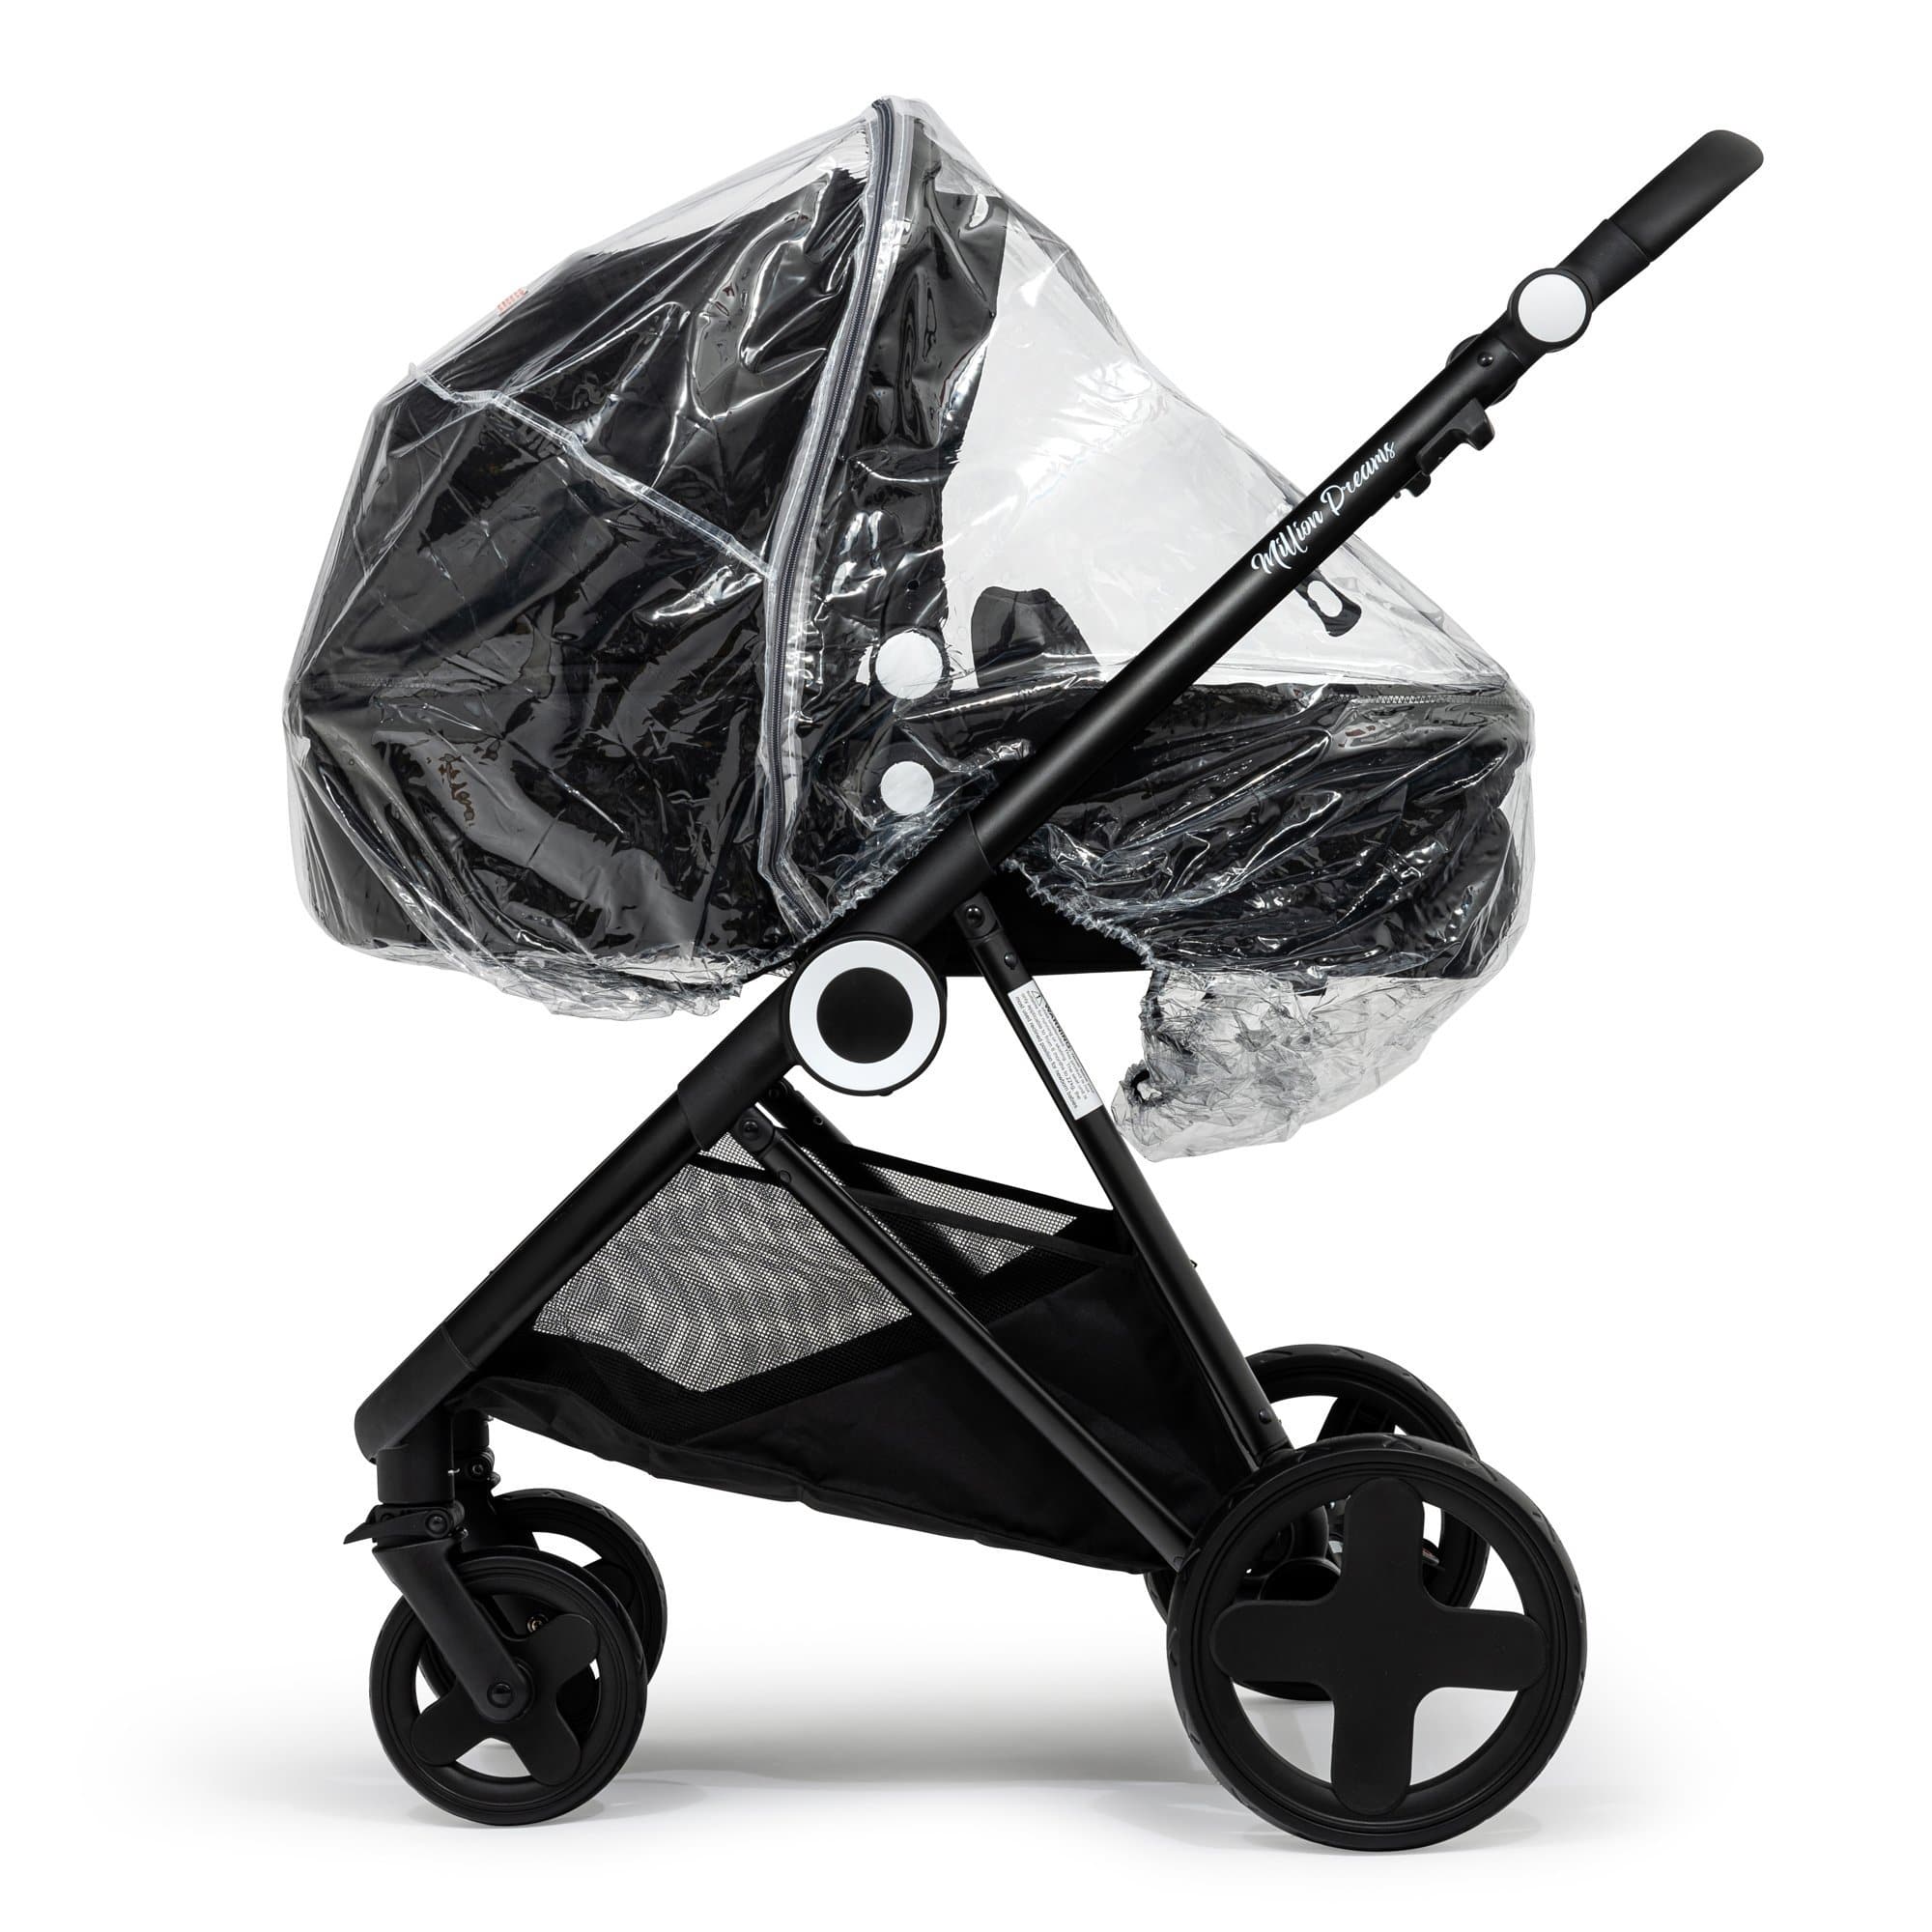 2 in 1 Rain Cover Compatible with Zeta - Fits All Models - For Your Little One